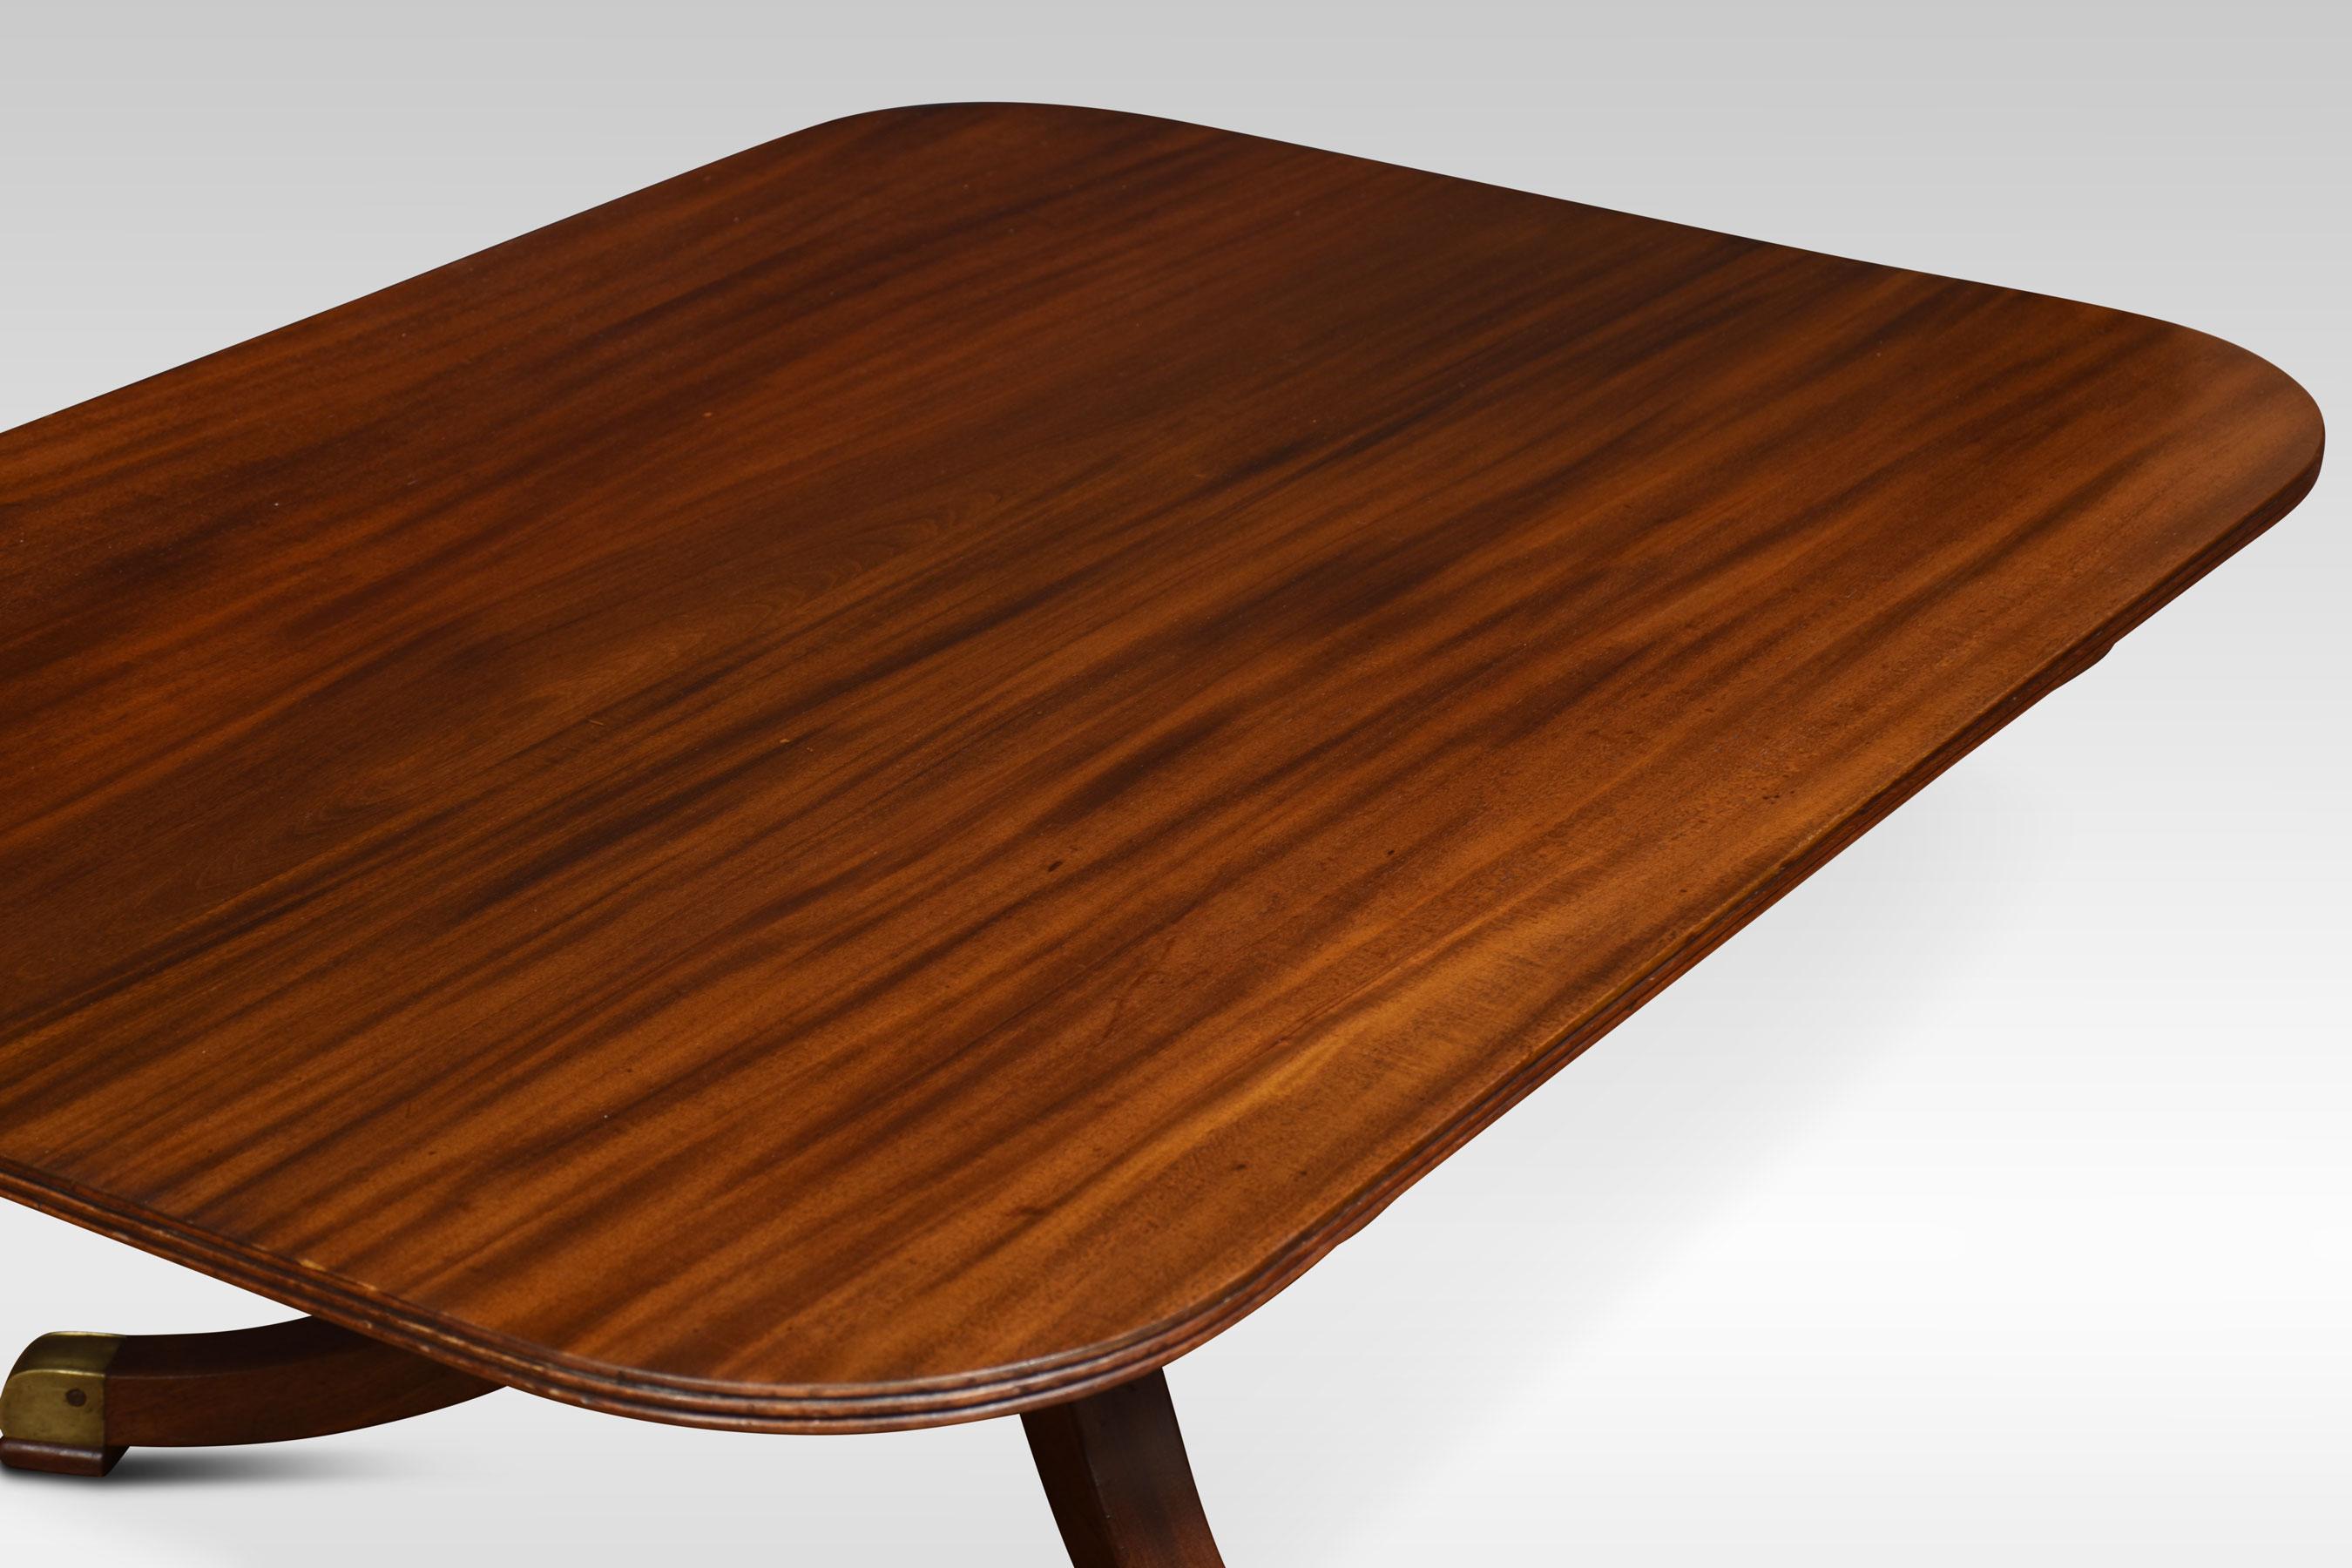 Regency mahogany coffee table, the shaped rectangular top having molded edge raised on a pedestal base and splayed legs. This table has been reduced to coffee table height
Dimensions
Height 20 inches
Width 51.5 inches
Depth 37.5 inches.